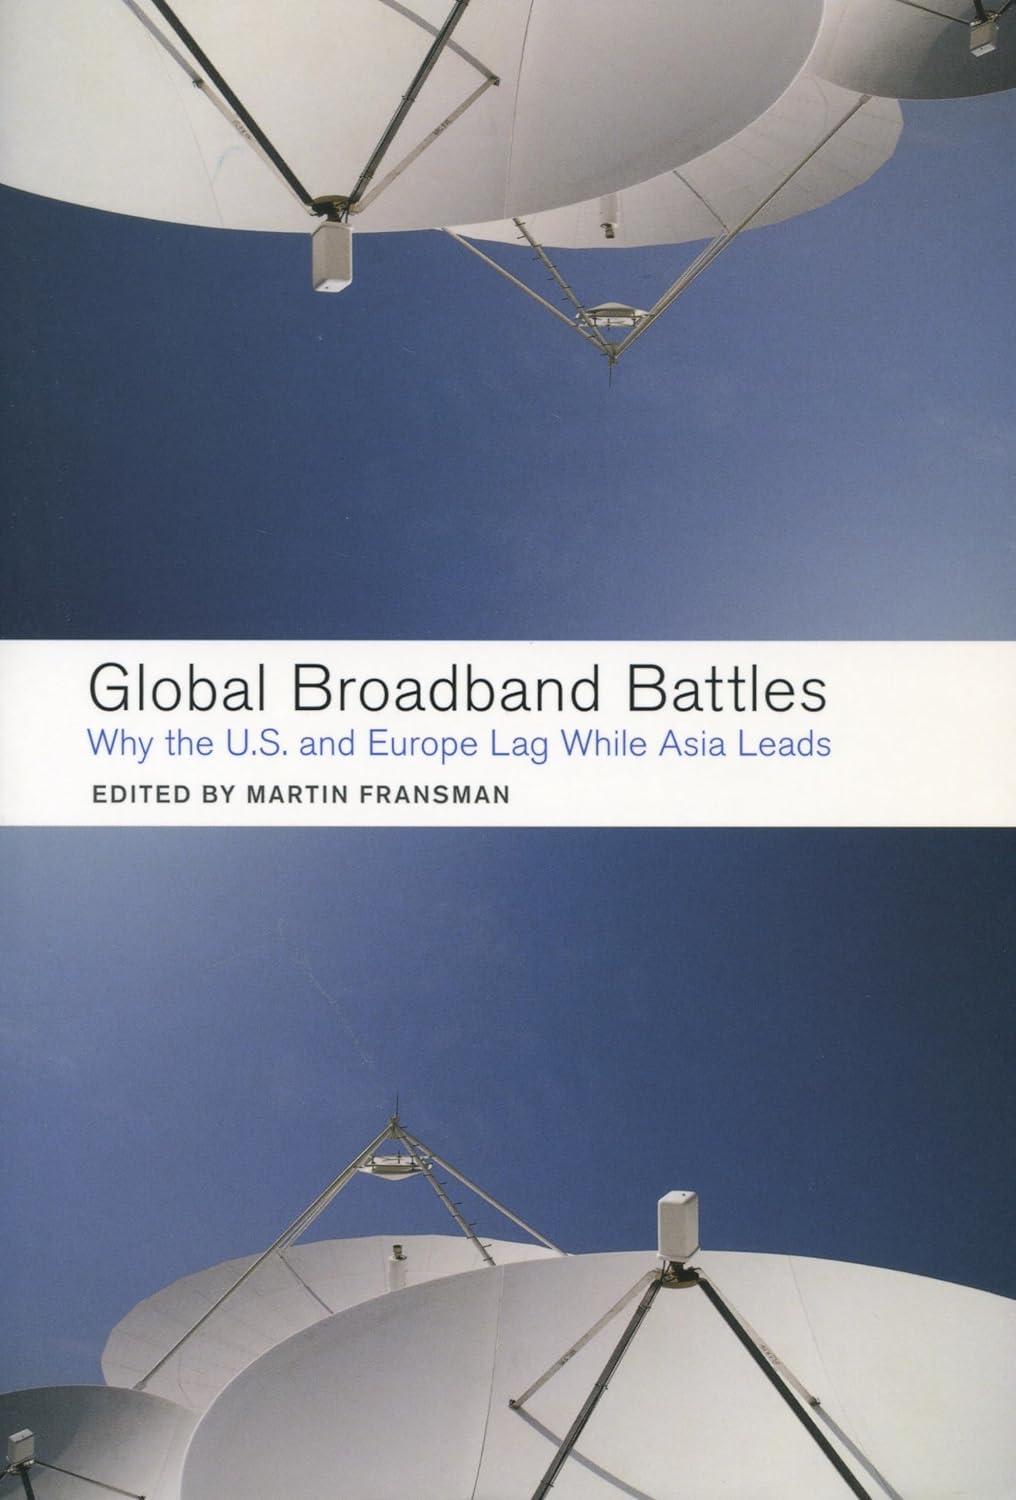 global broadband battles why the u.s. and europe lag while asia leads 1st edition martin fransman 0804753067,